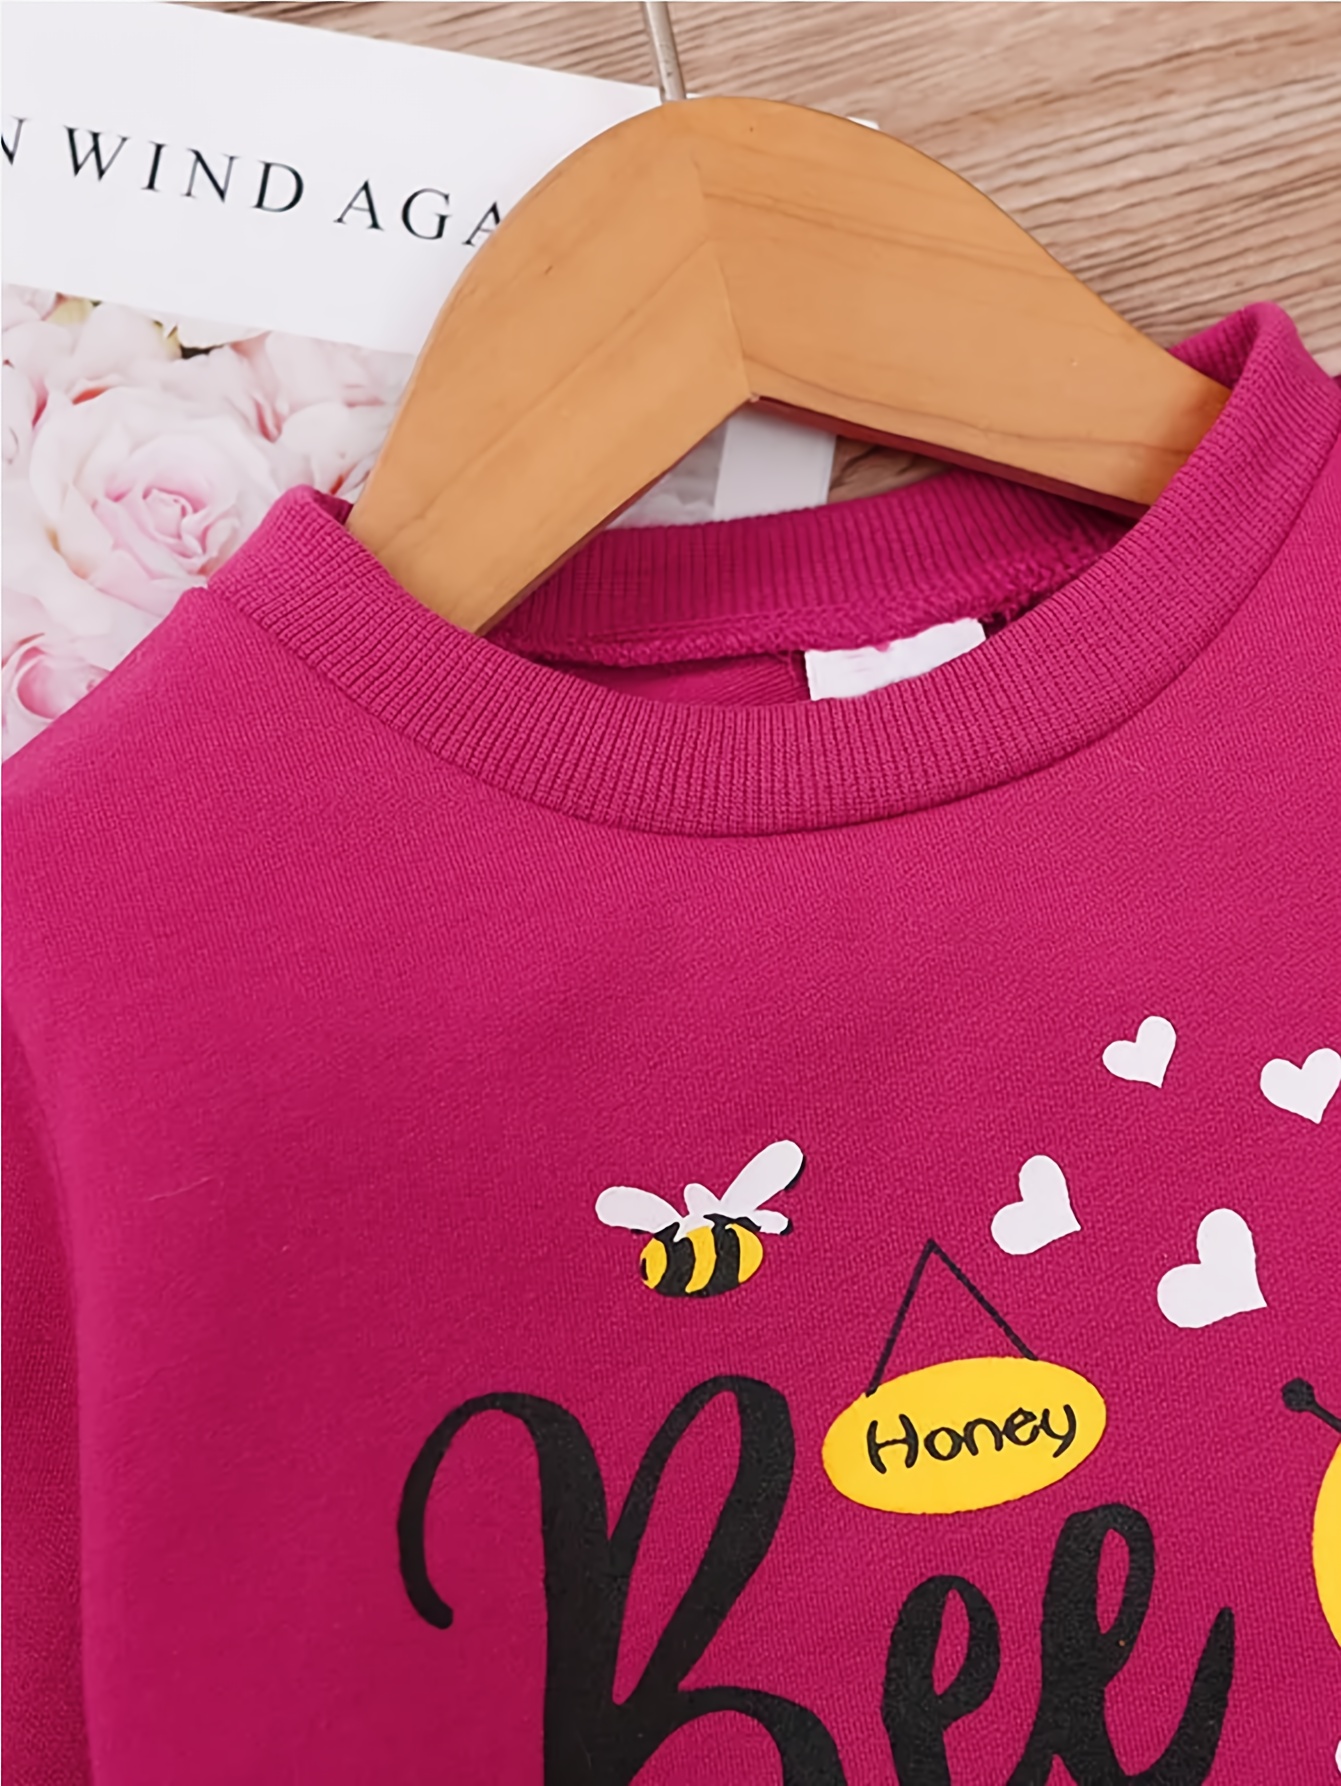 Toddler Girl Letter Bee Print Casual Pullover Sweatshirt